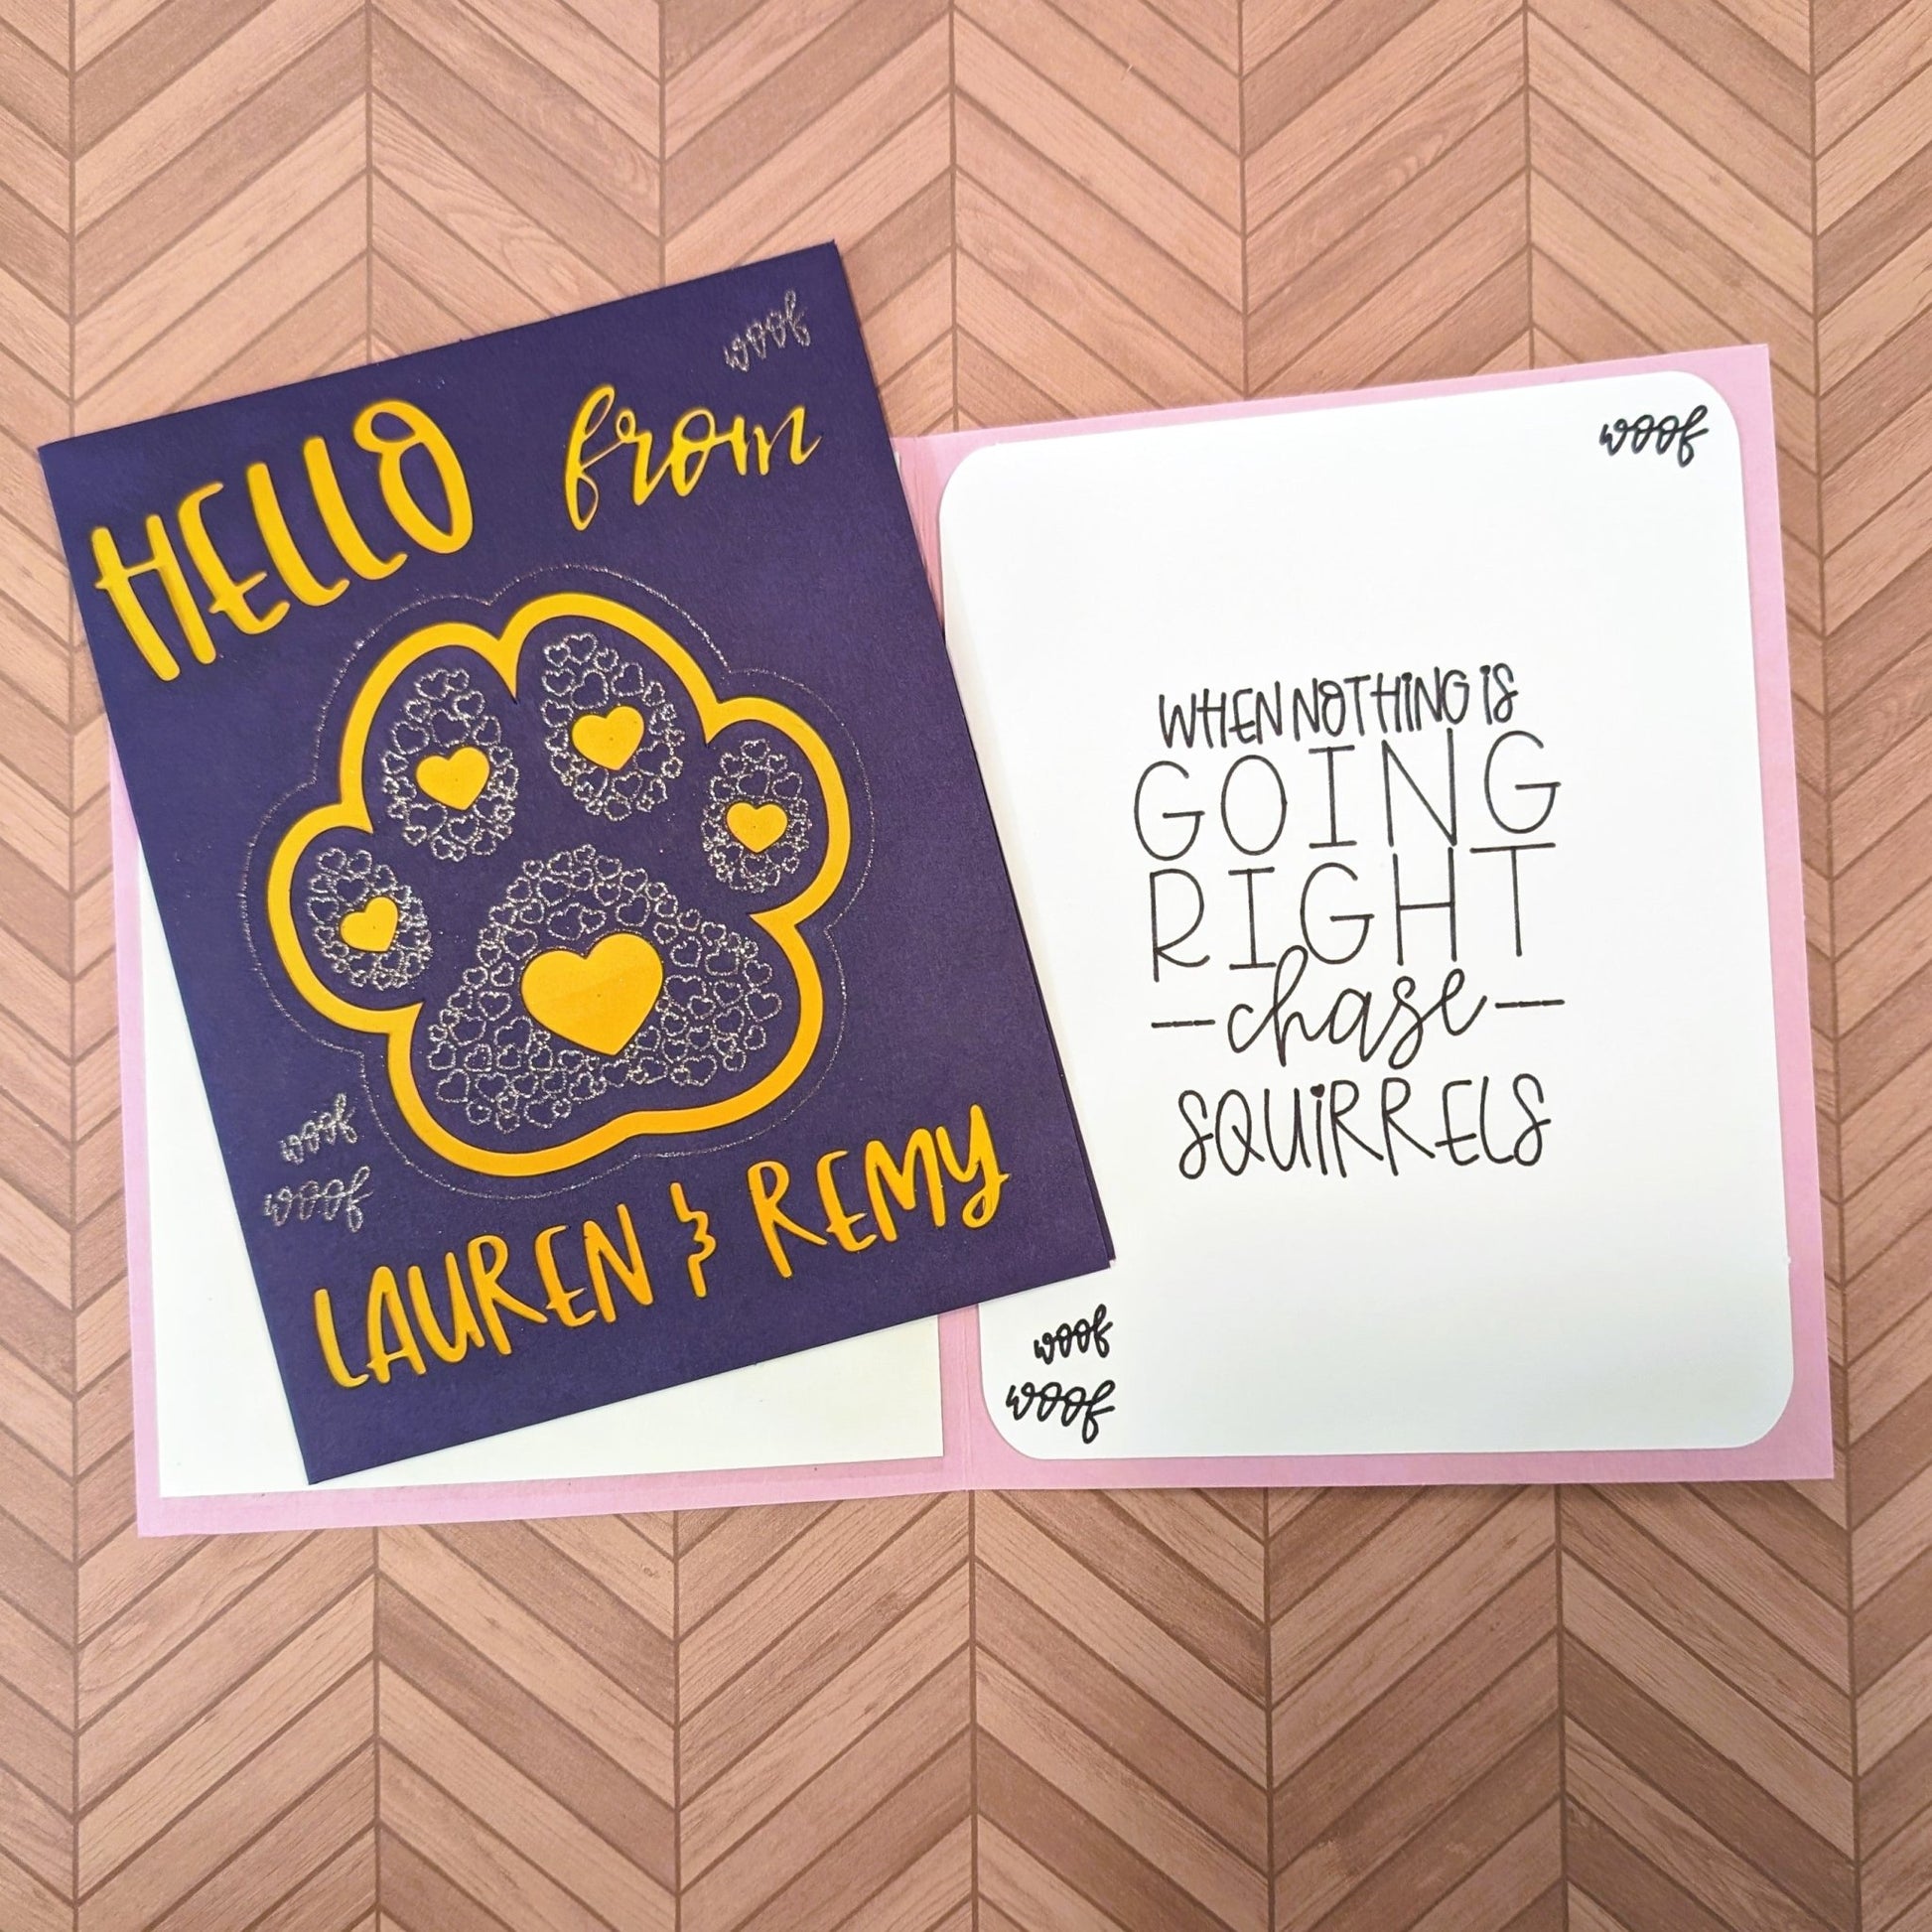 "Hello from Lauren & Remy" Custom Pet Cards - Handmade, Made-to-Order - 31 Rubies Designs